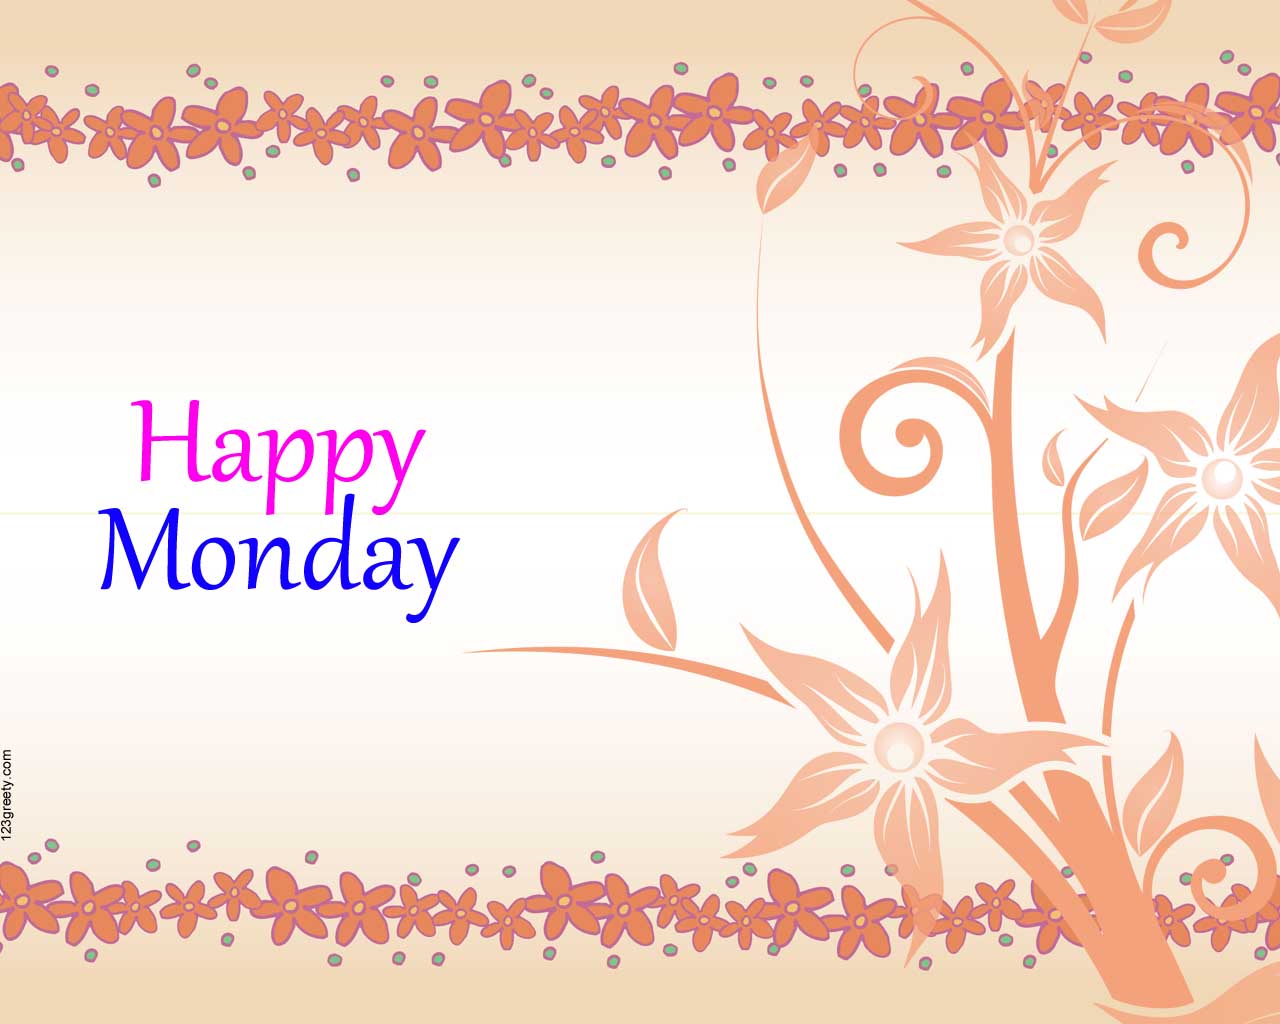 Happy Monday Greeting Wallpaper Background